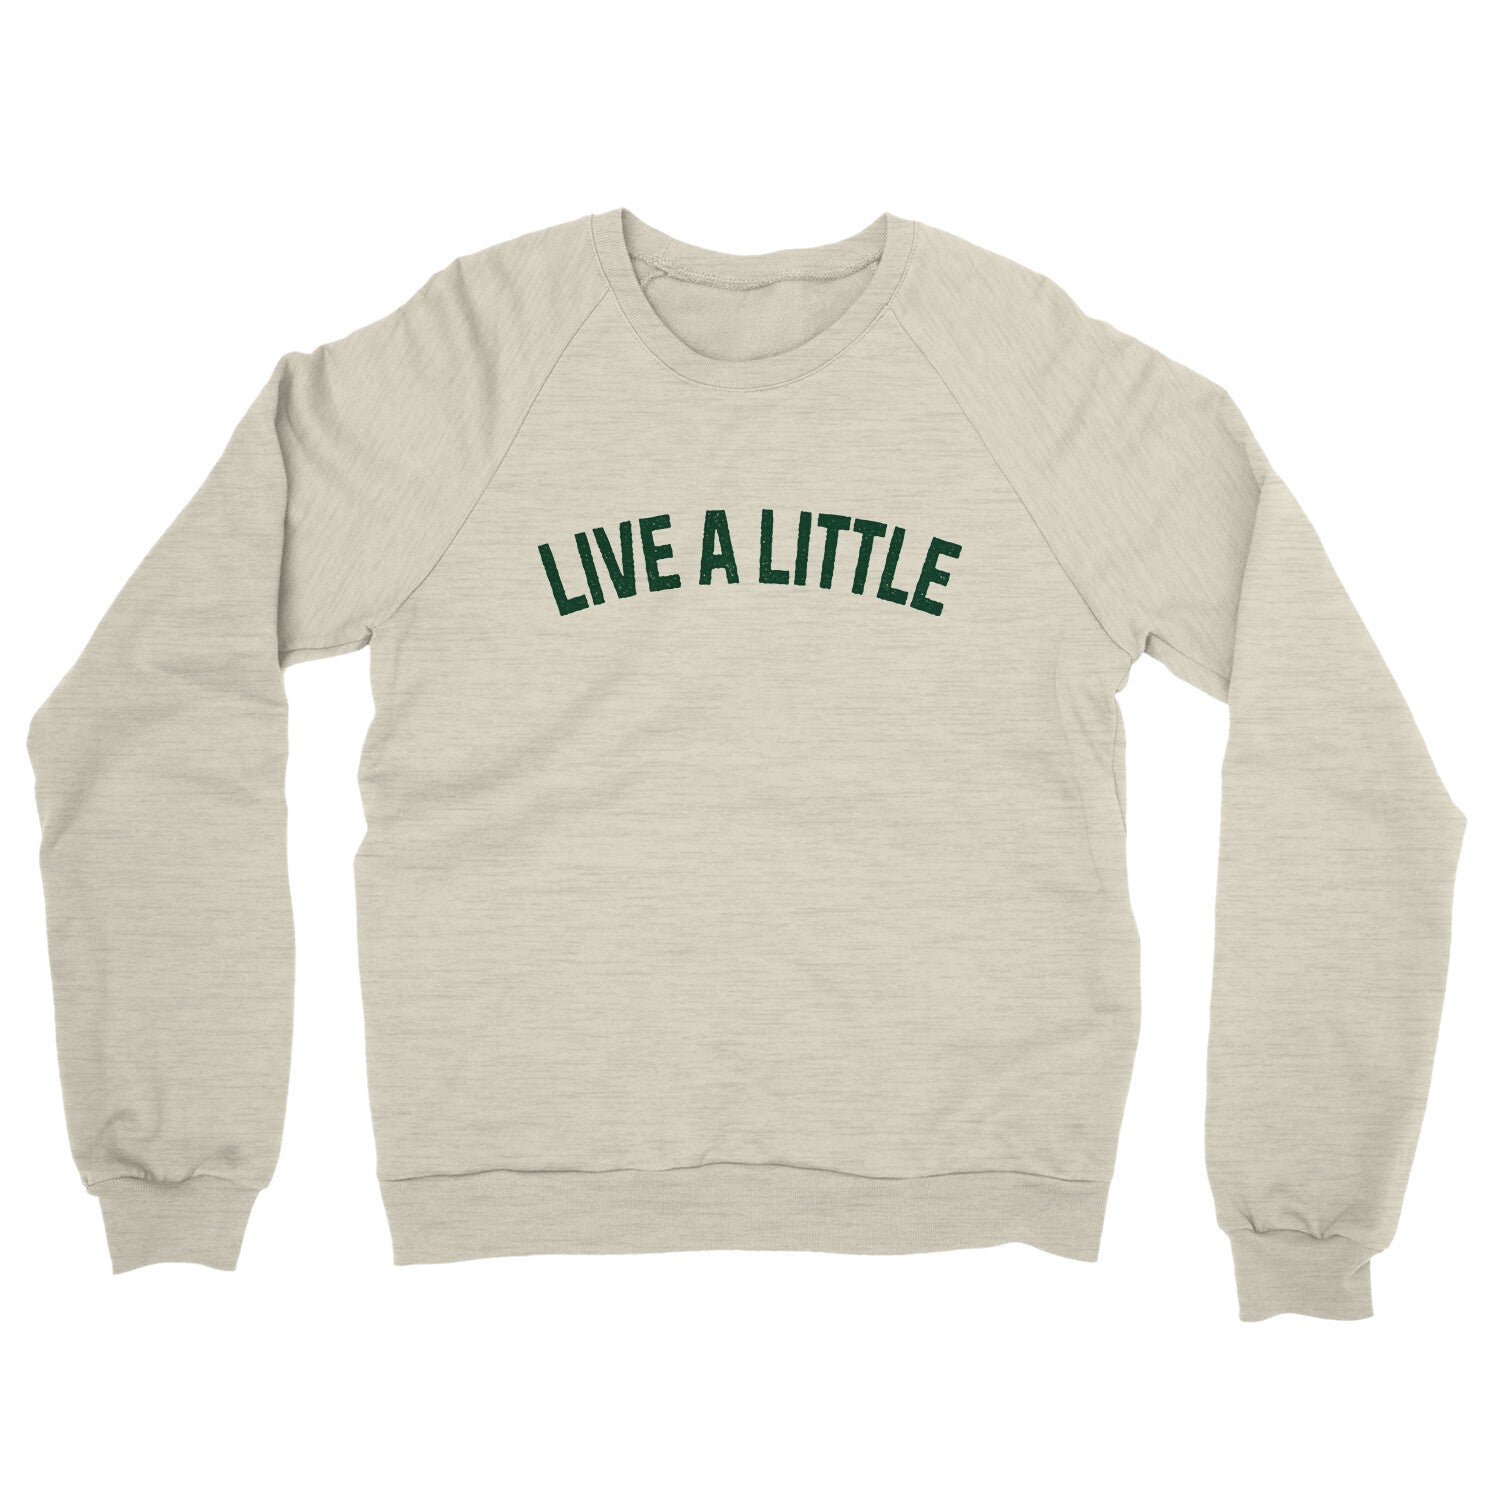 Live a Little in Heather Oatmeal Color